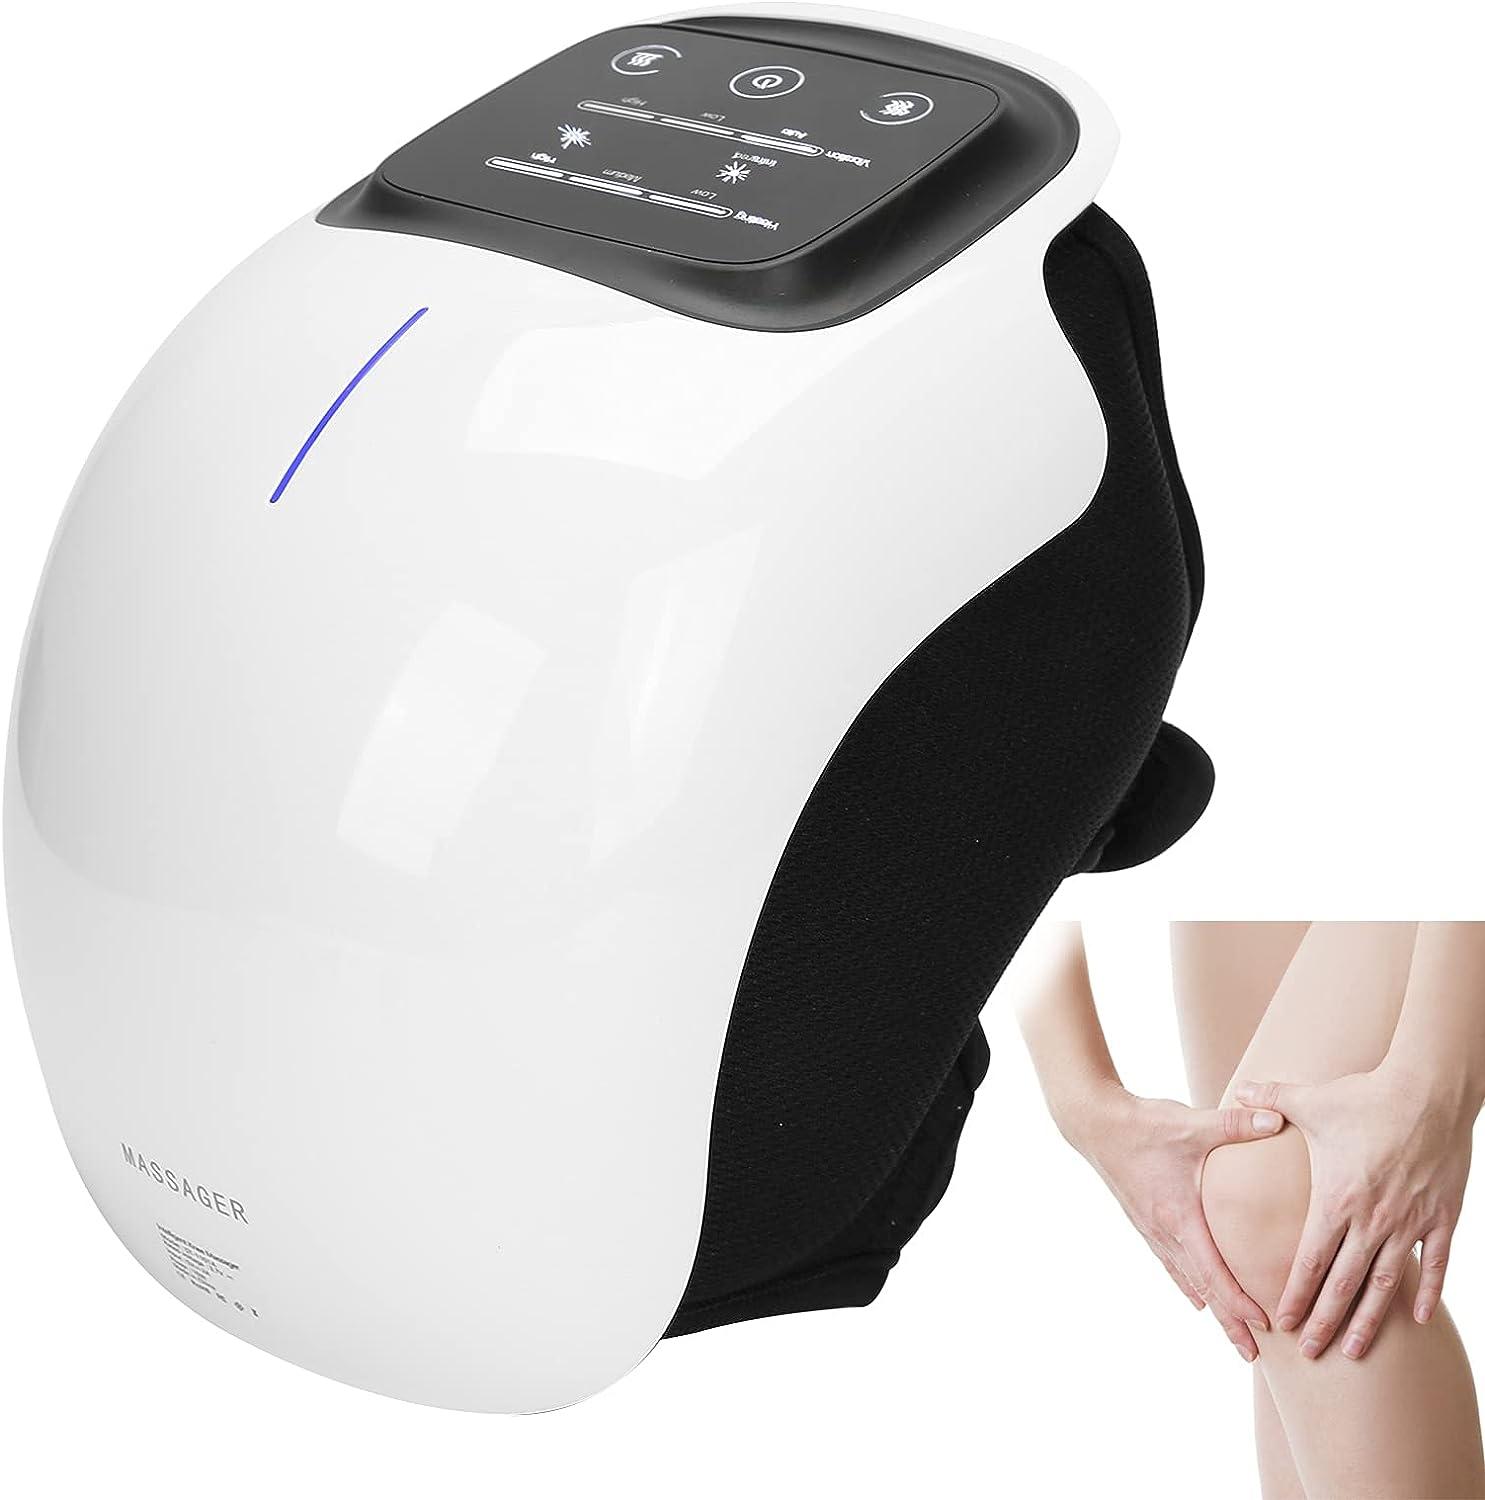 Do Electric Knee Massagers With IR Laser And Vibration Really Work